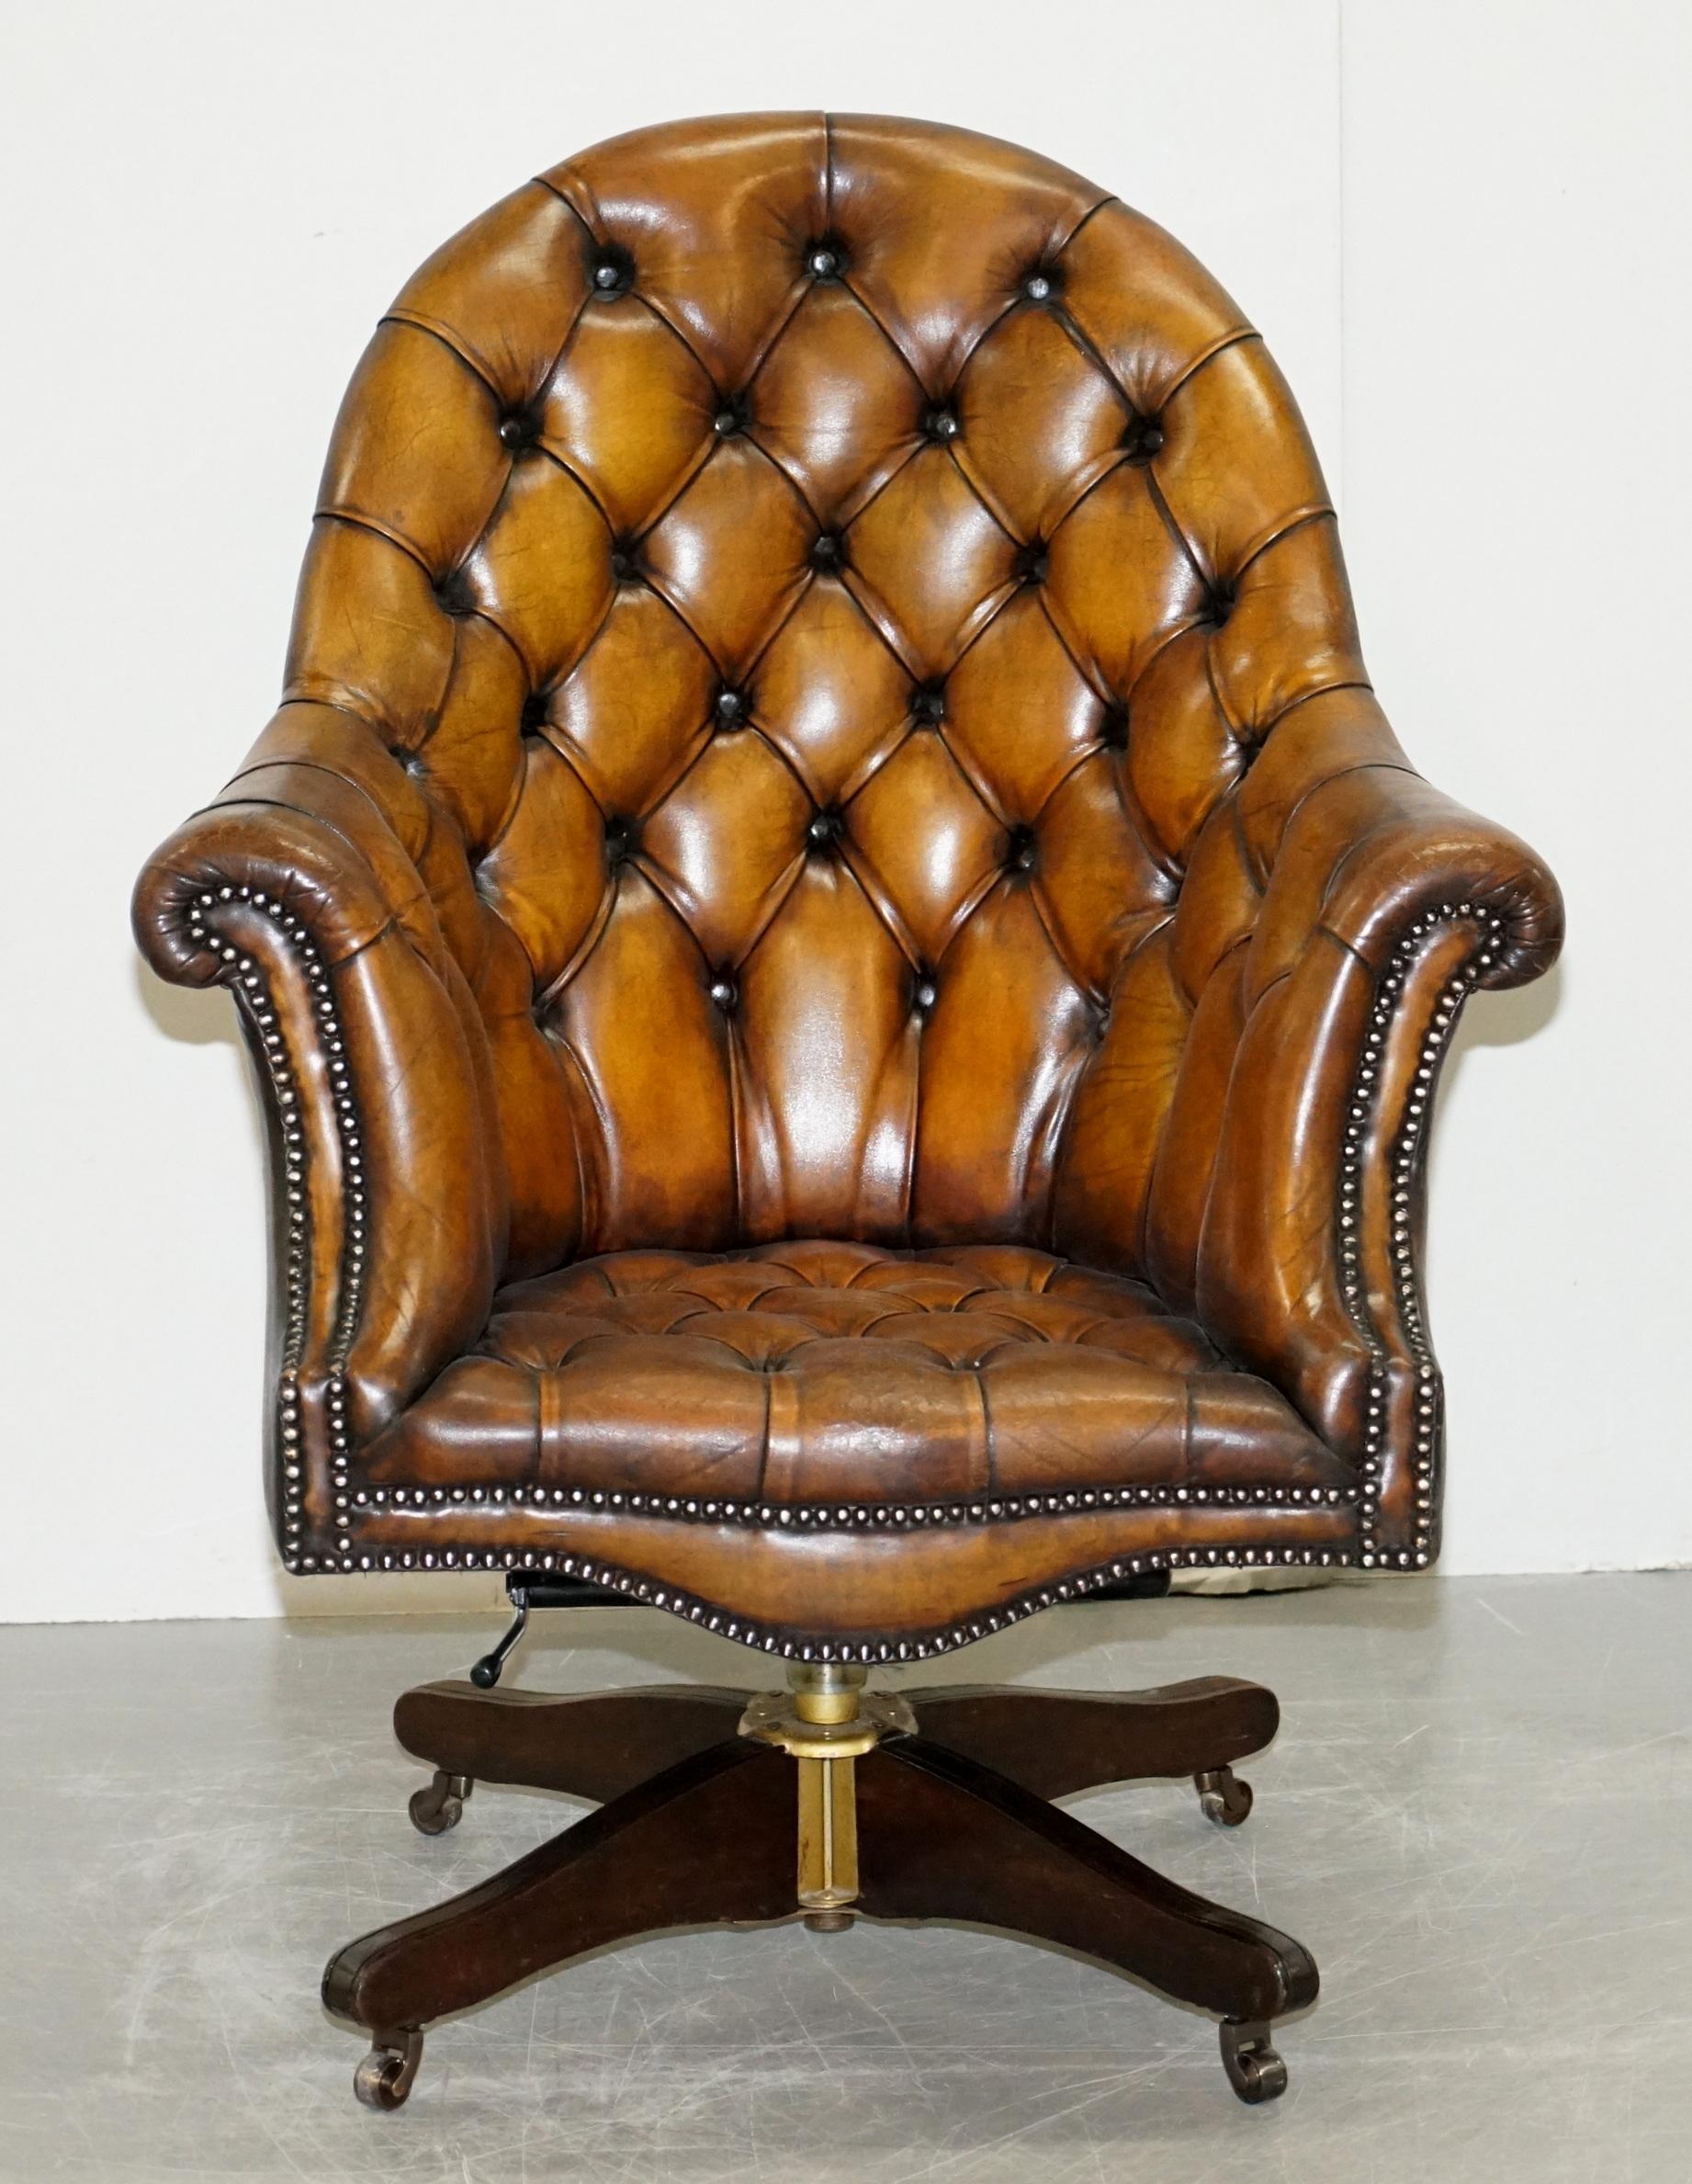 We are delighted to offer this lovely fully restored original vintage hand dyed cigar brown leather Chesterfield tufted directors chair

A very good looking well made and comfortable directors chair. Its chesterfield buttoned both back and base,